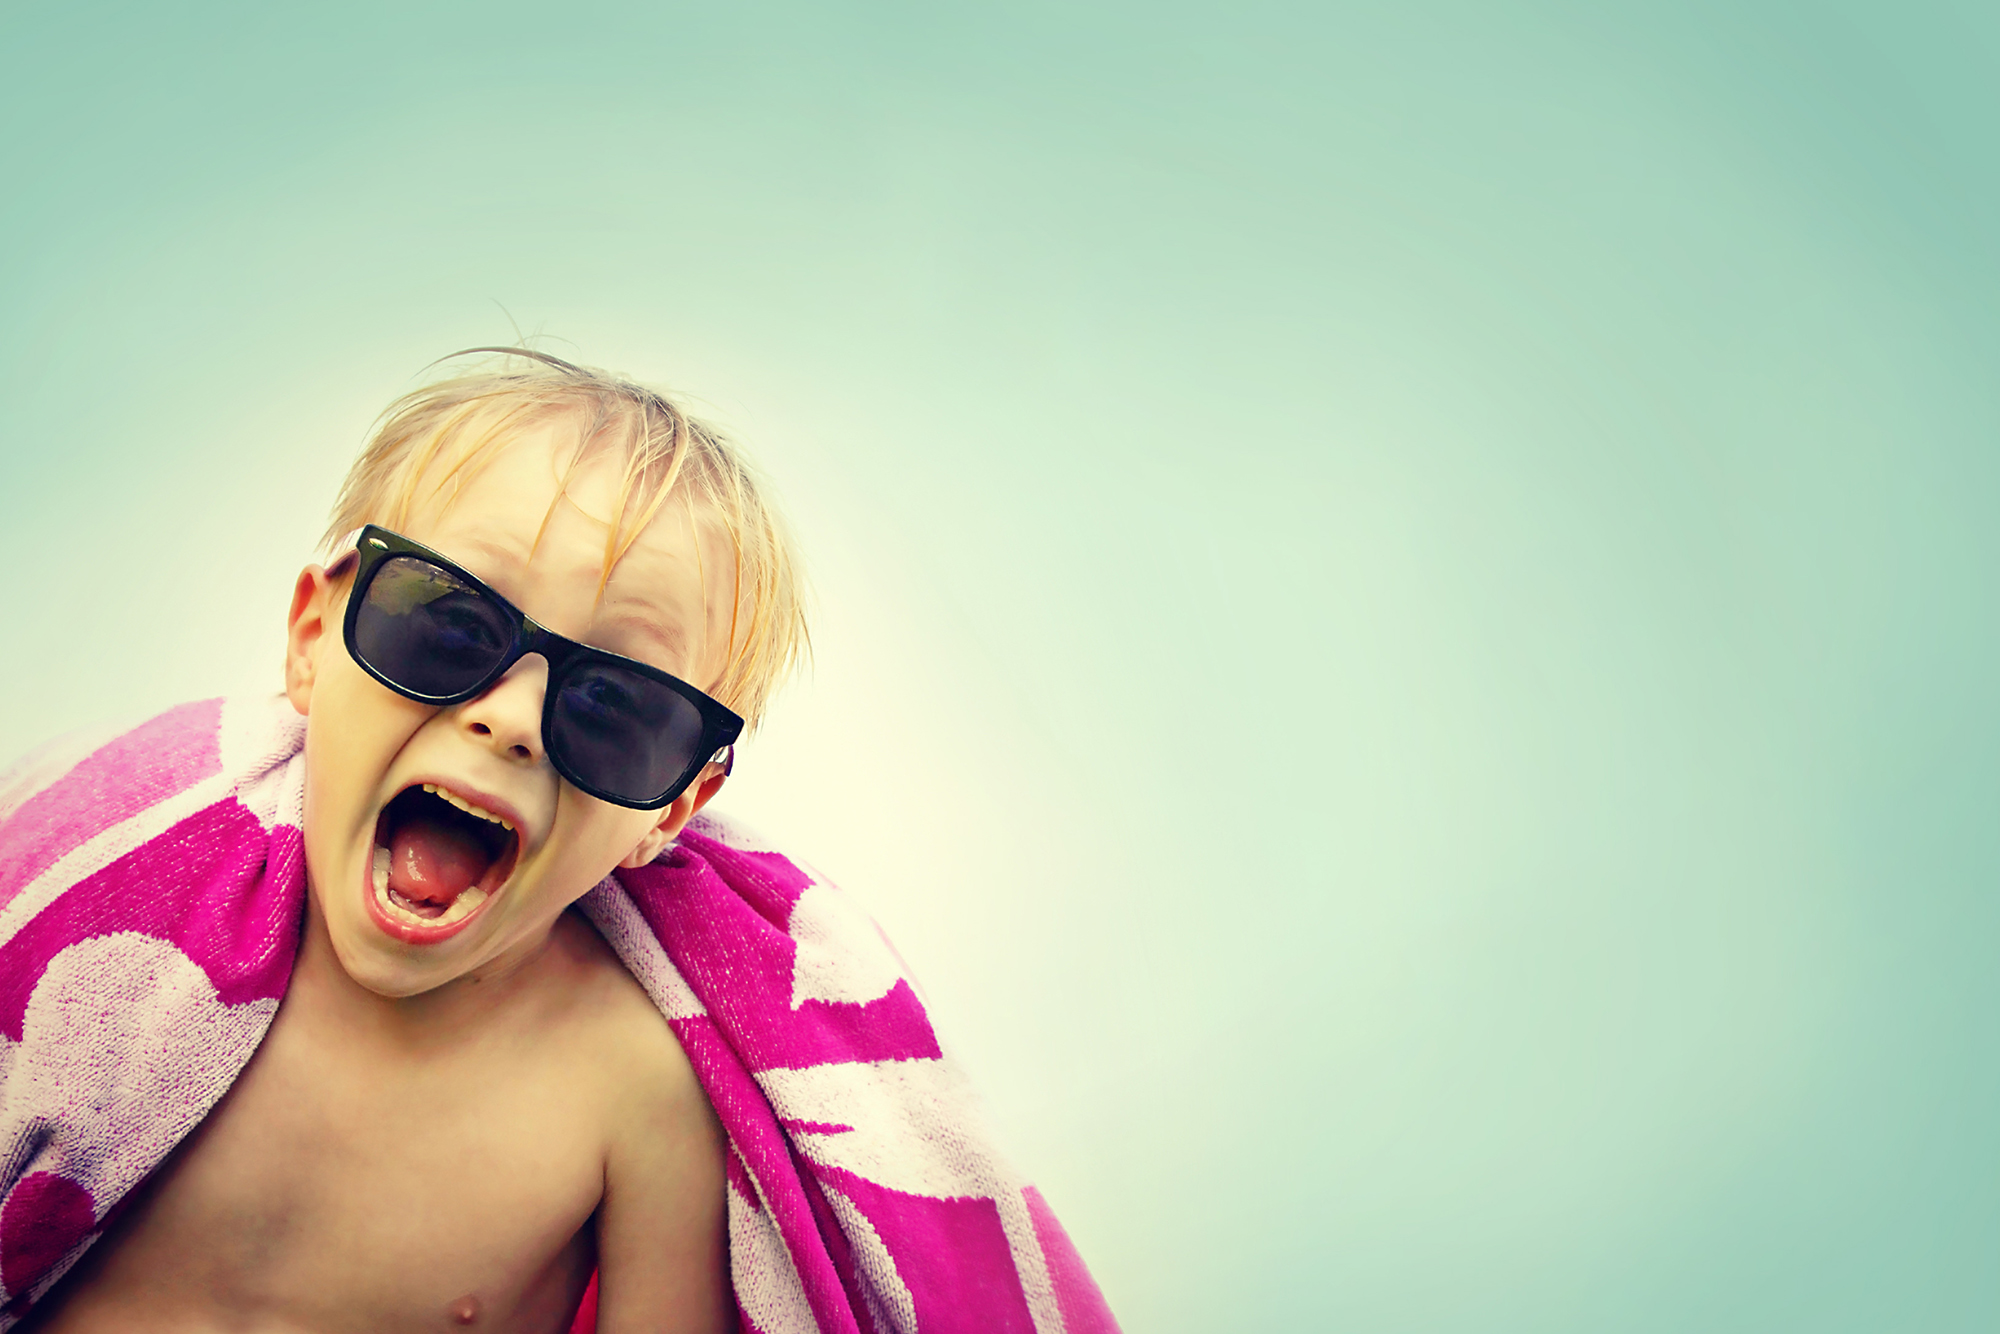 Excited Child in Beach Towel on Summer Day